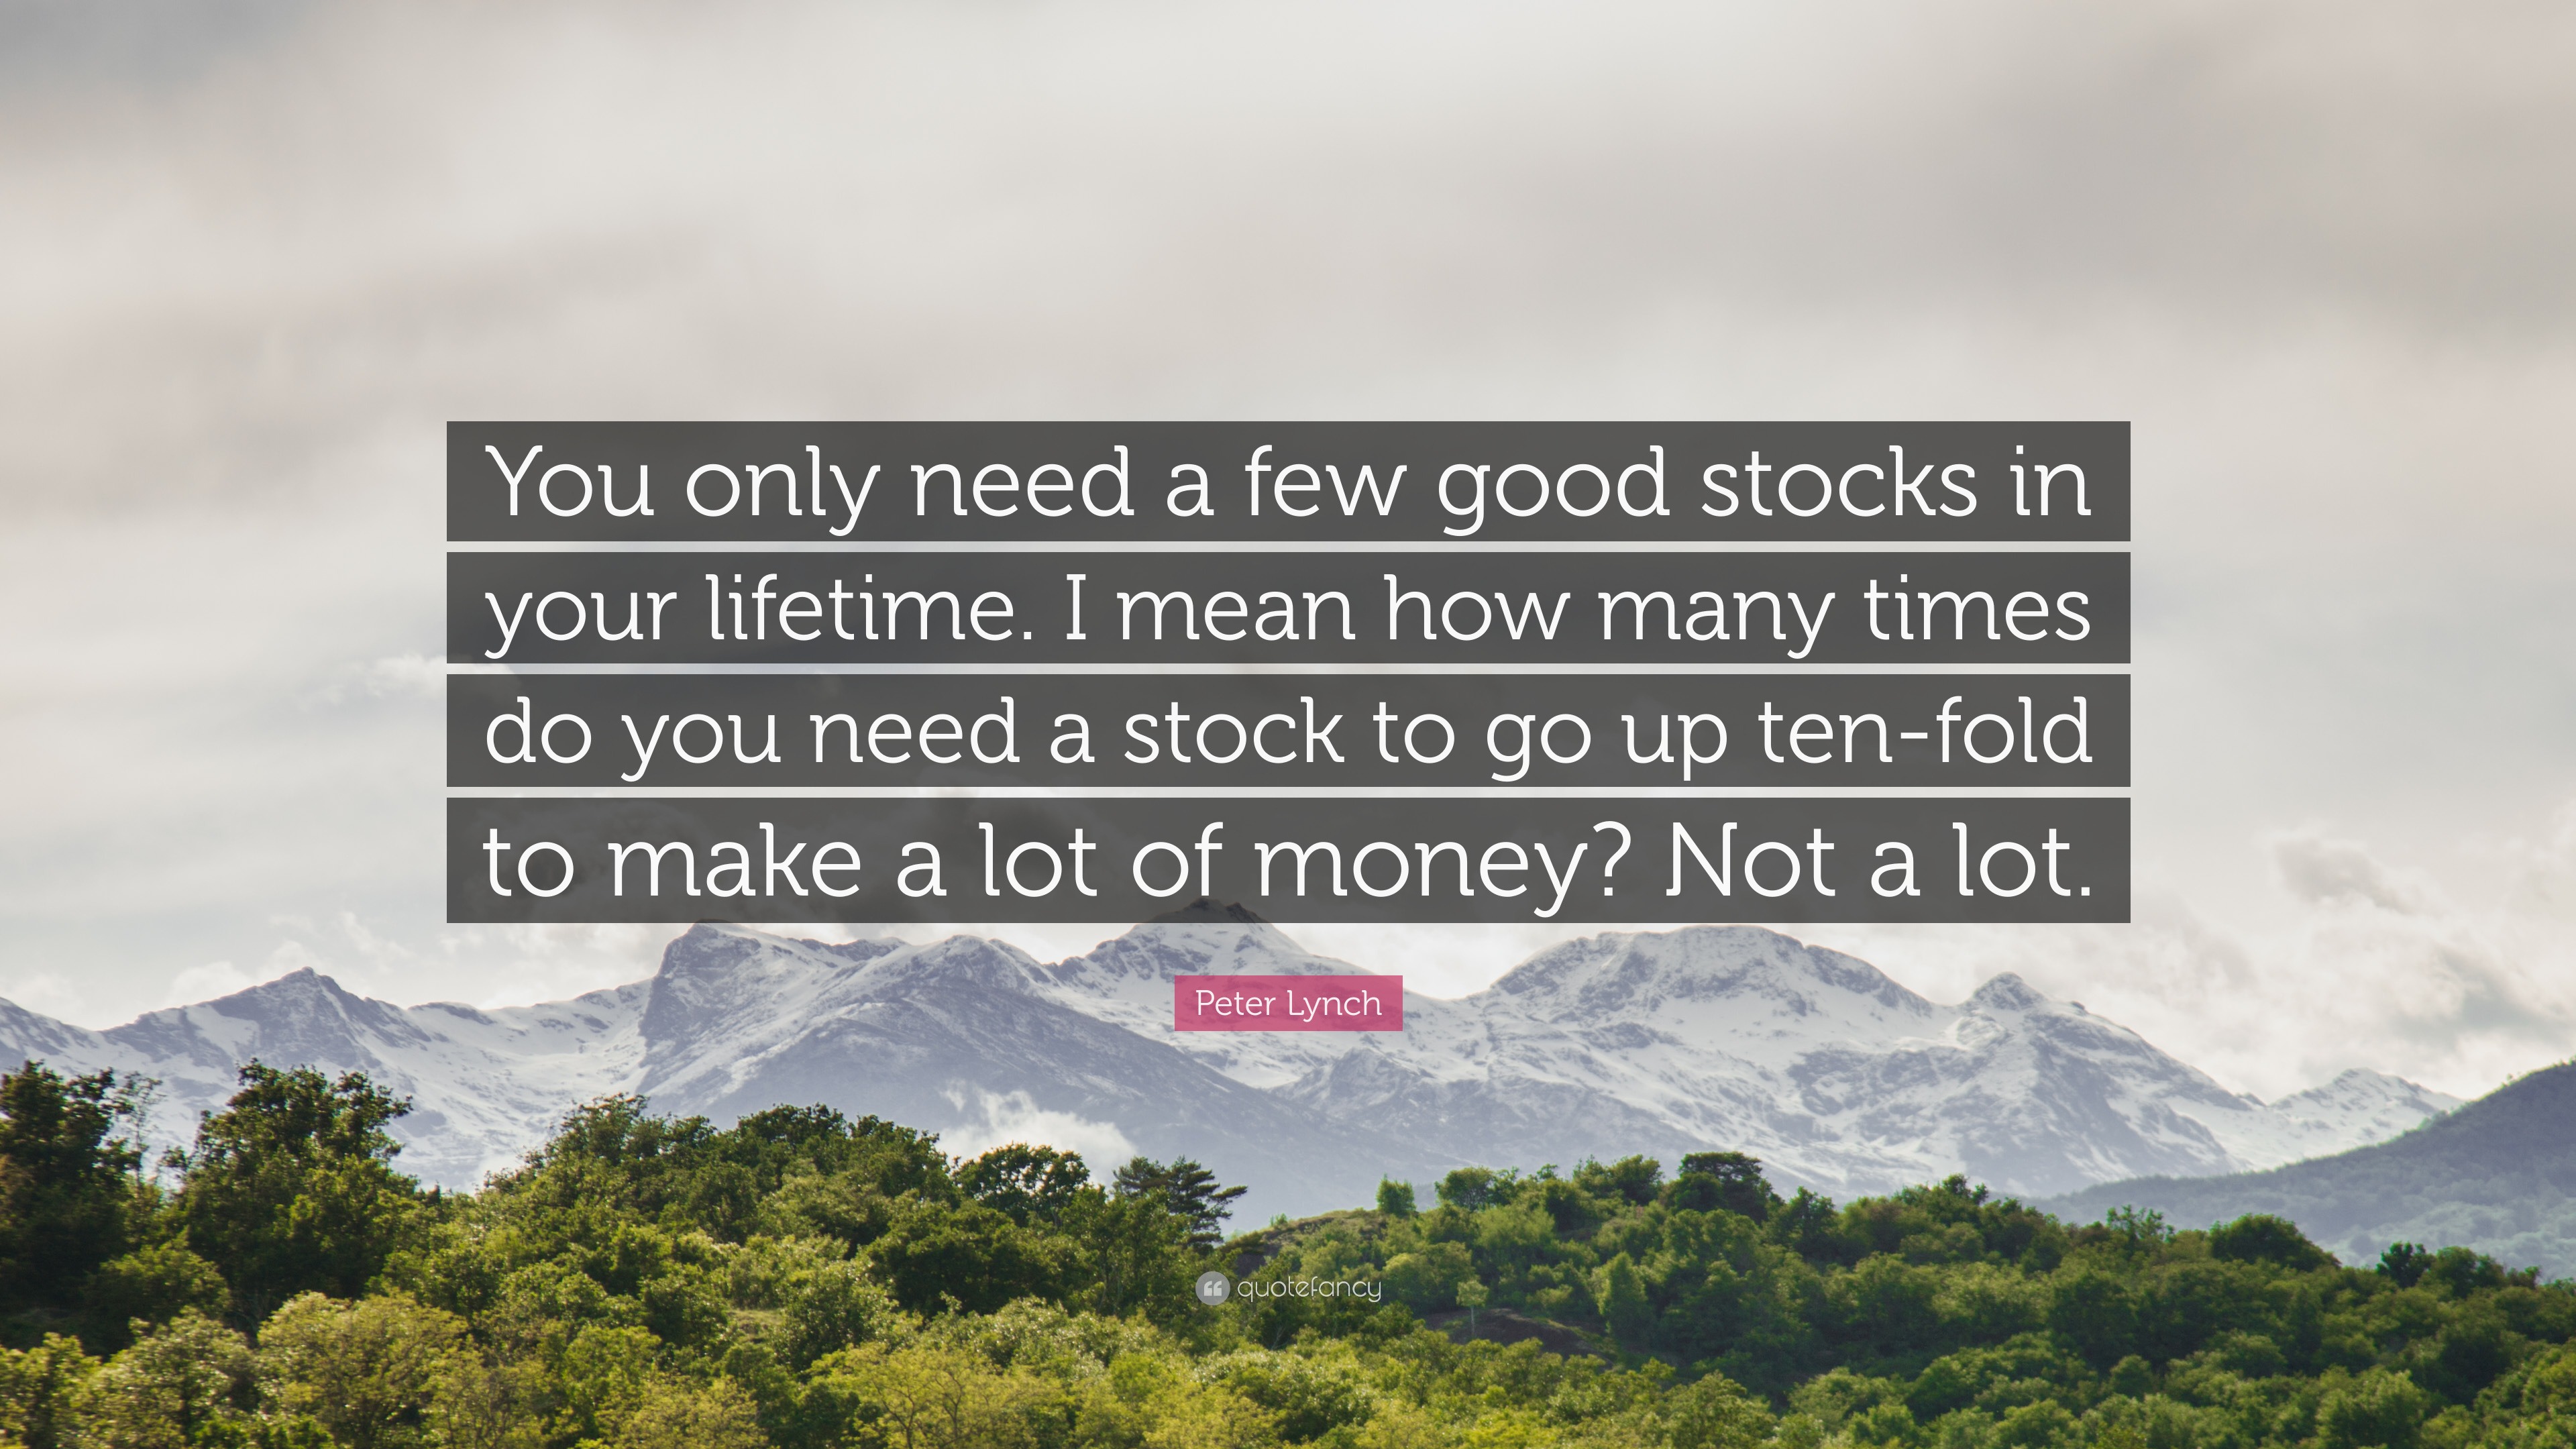 Peter Lynch Quote: “You only need a few good stocks in your